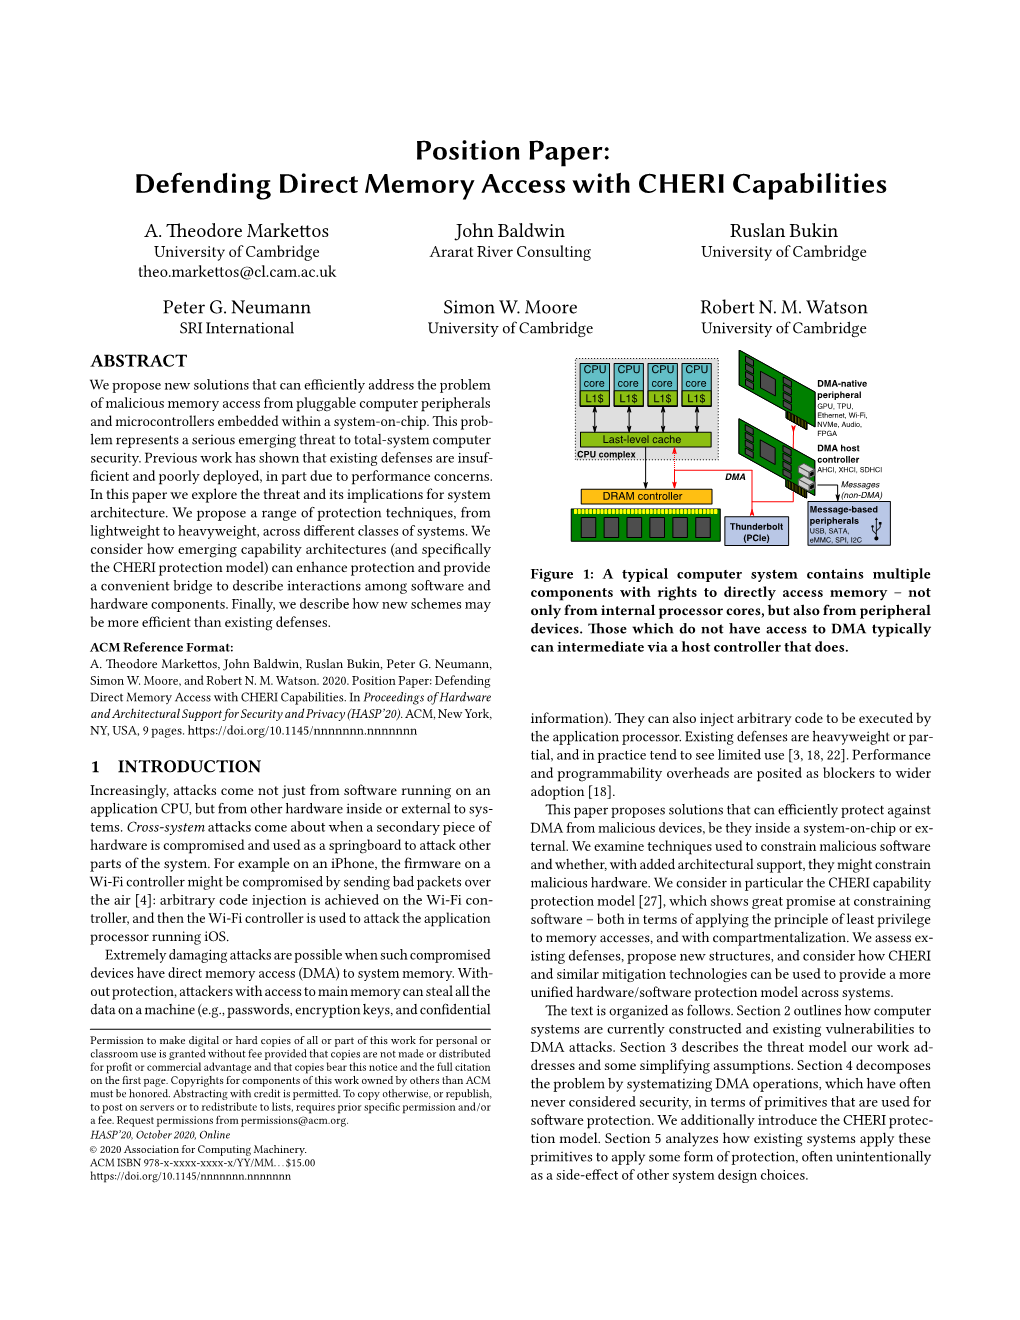 Position Paper:Defending Direct Memory Access with CHERI